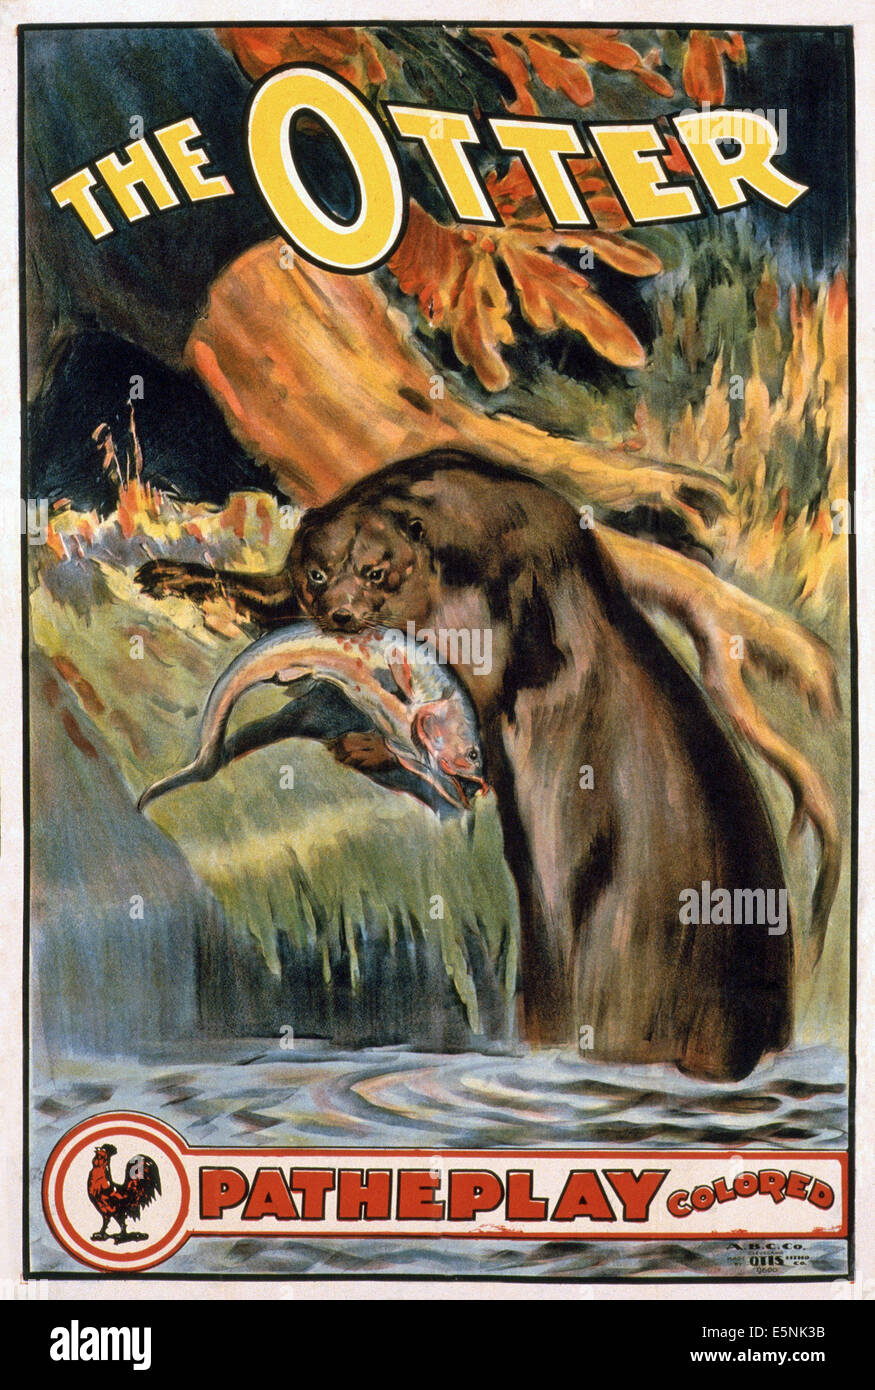 THE OTTER, US poster, 1913 Stock Photo